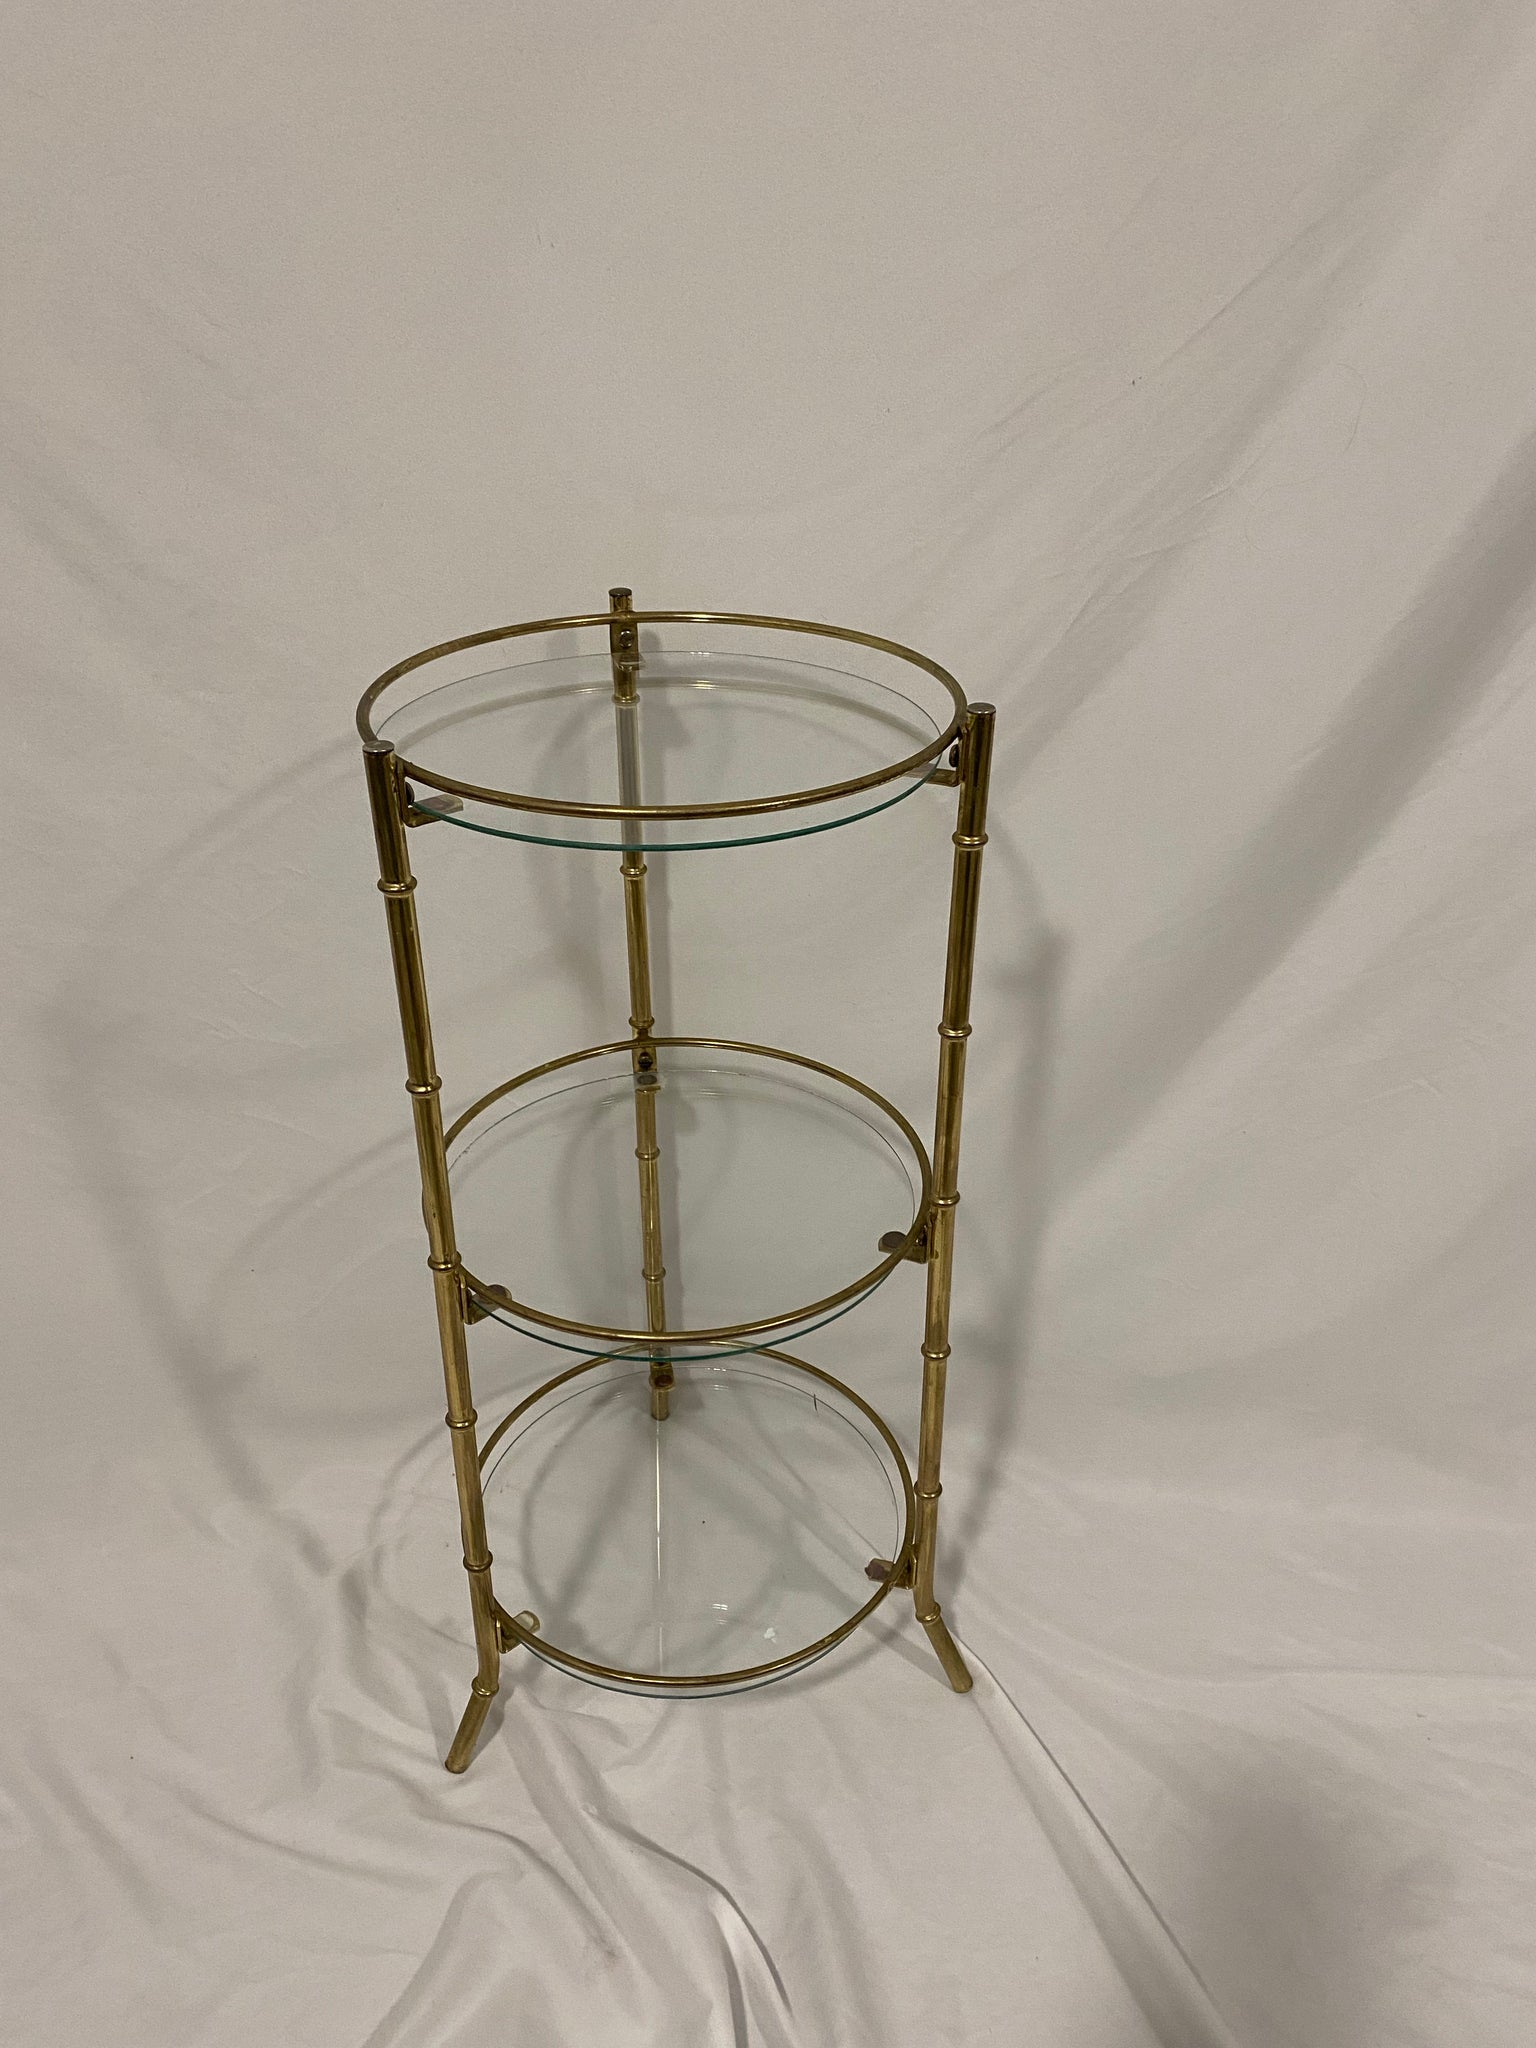 Small cylindrical brass & glass table / shelf